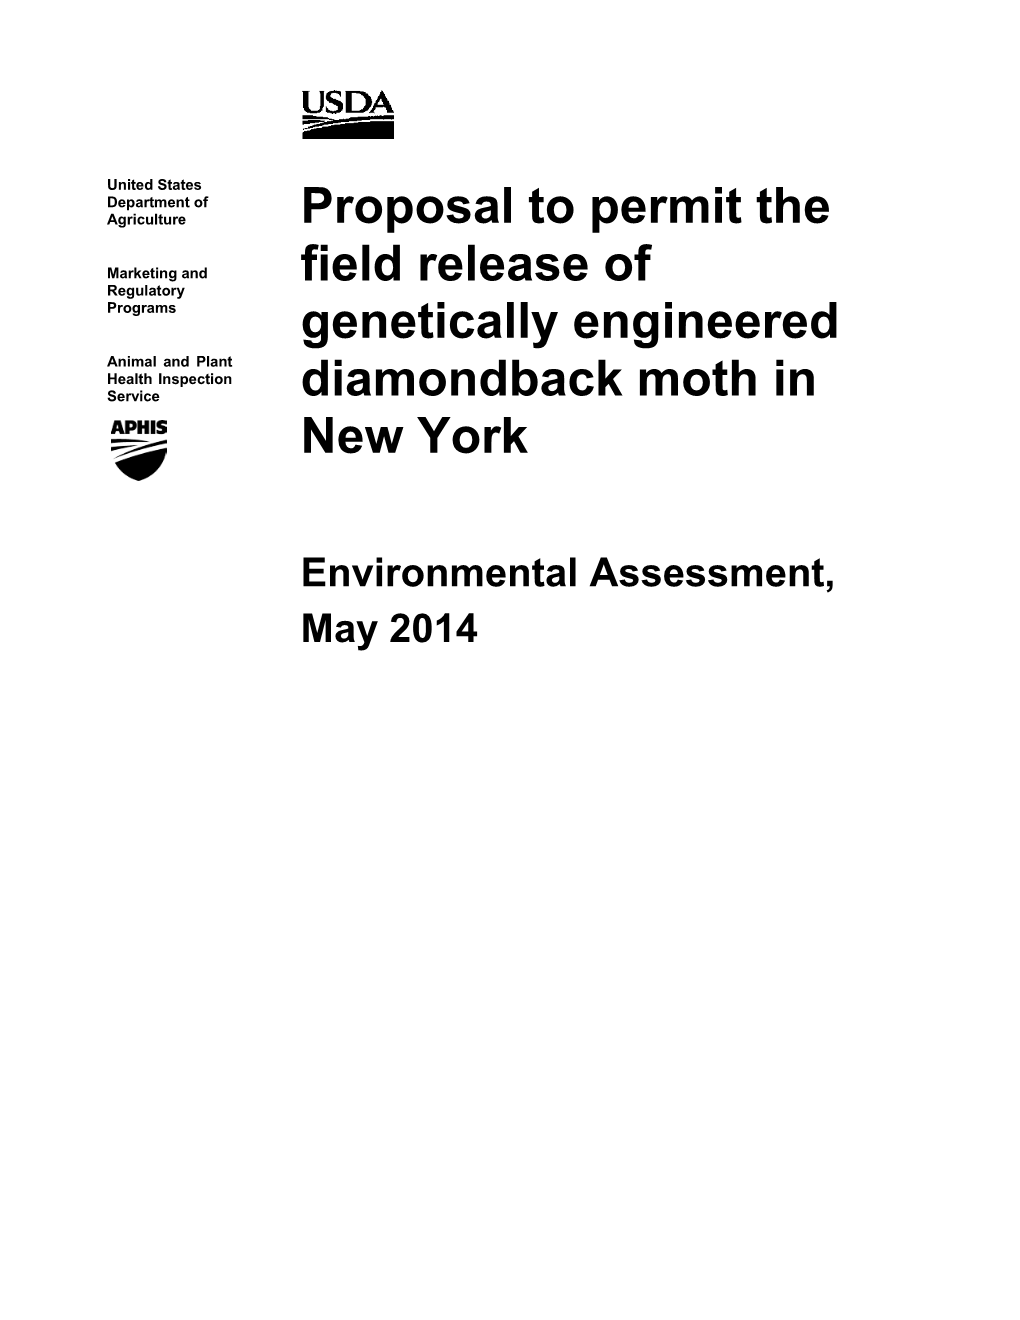 Proposal to Permit the Field Release of Genetically Engineered Diamondback Moth in New York